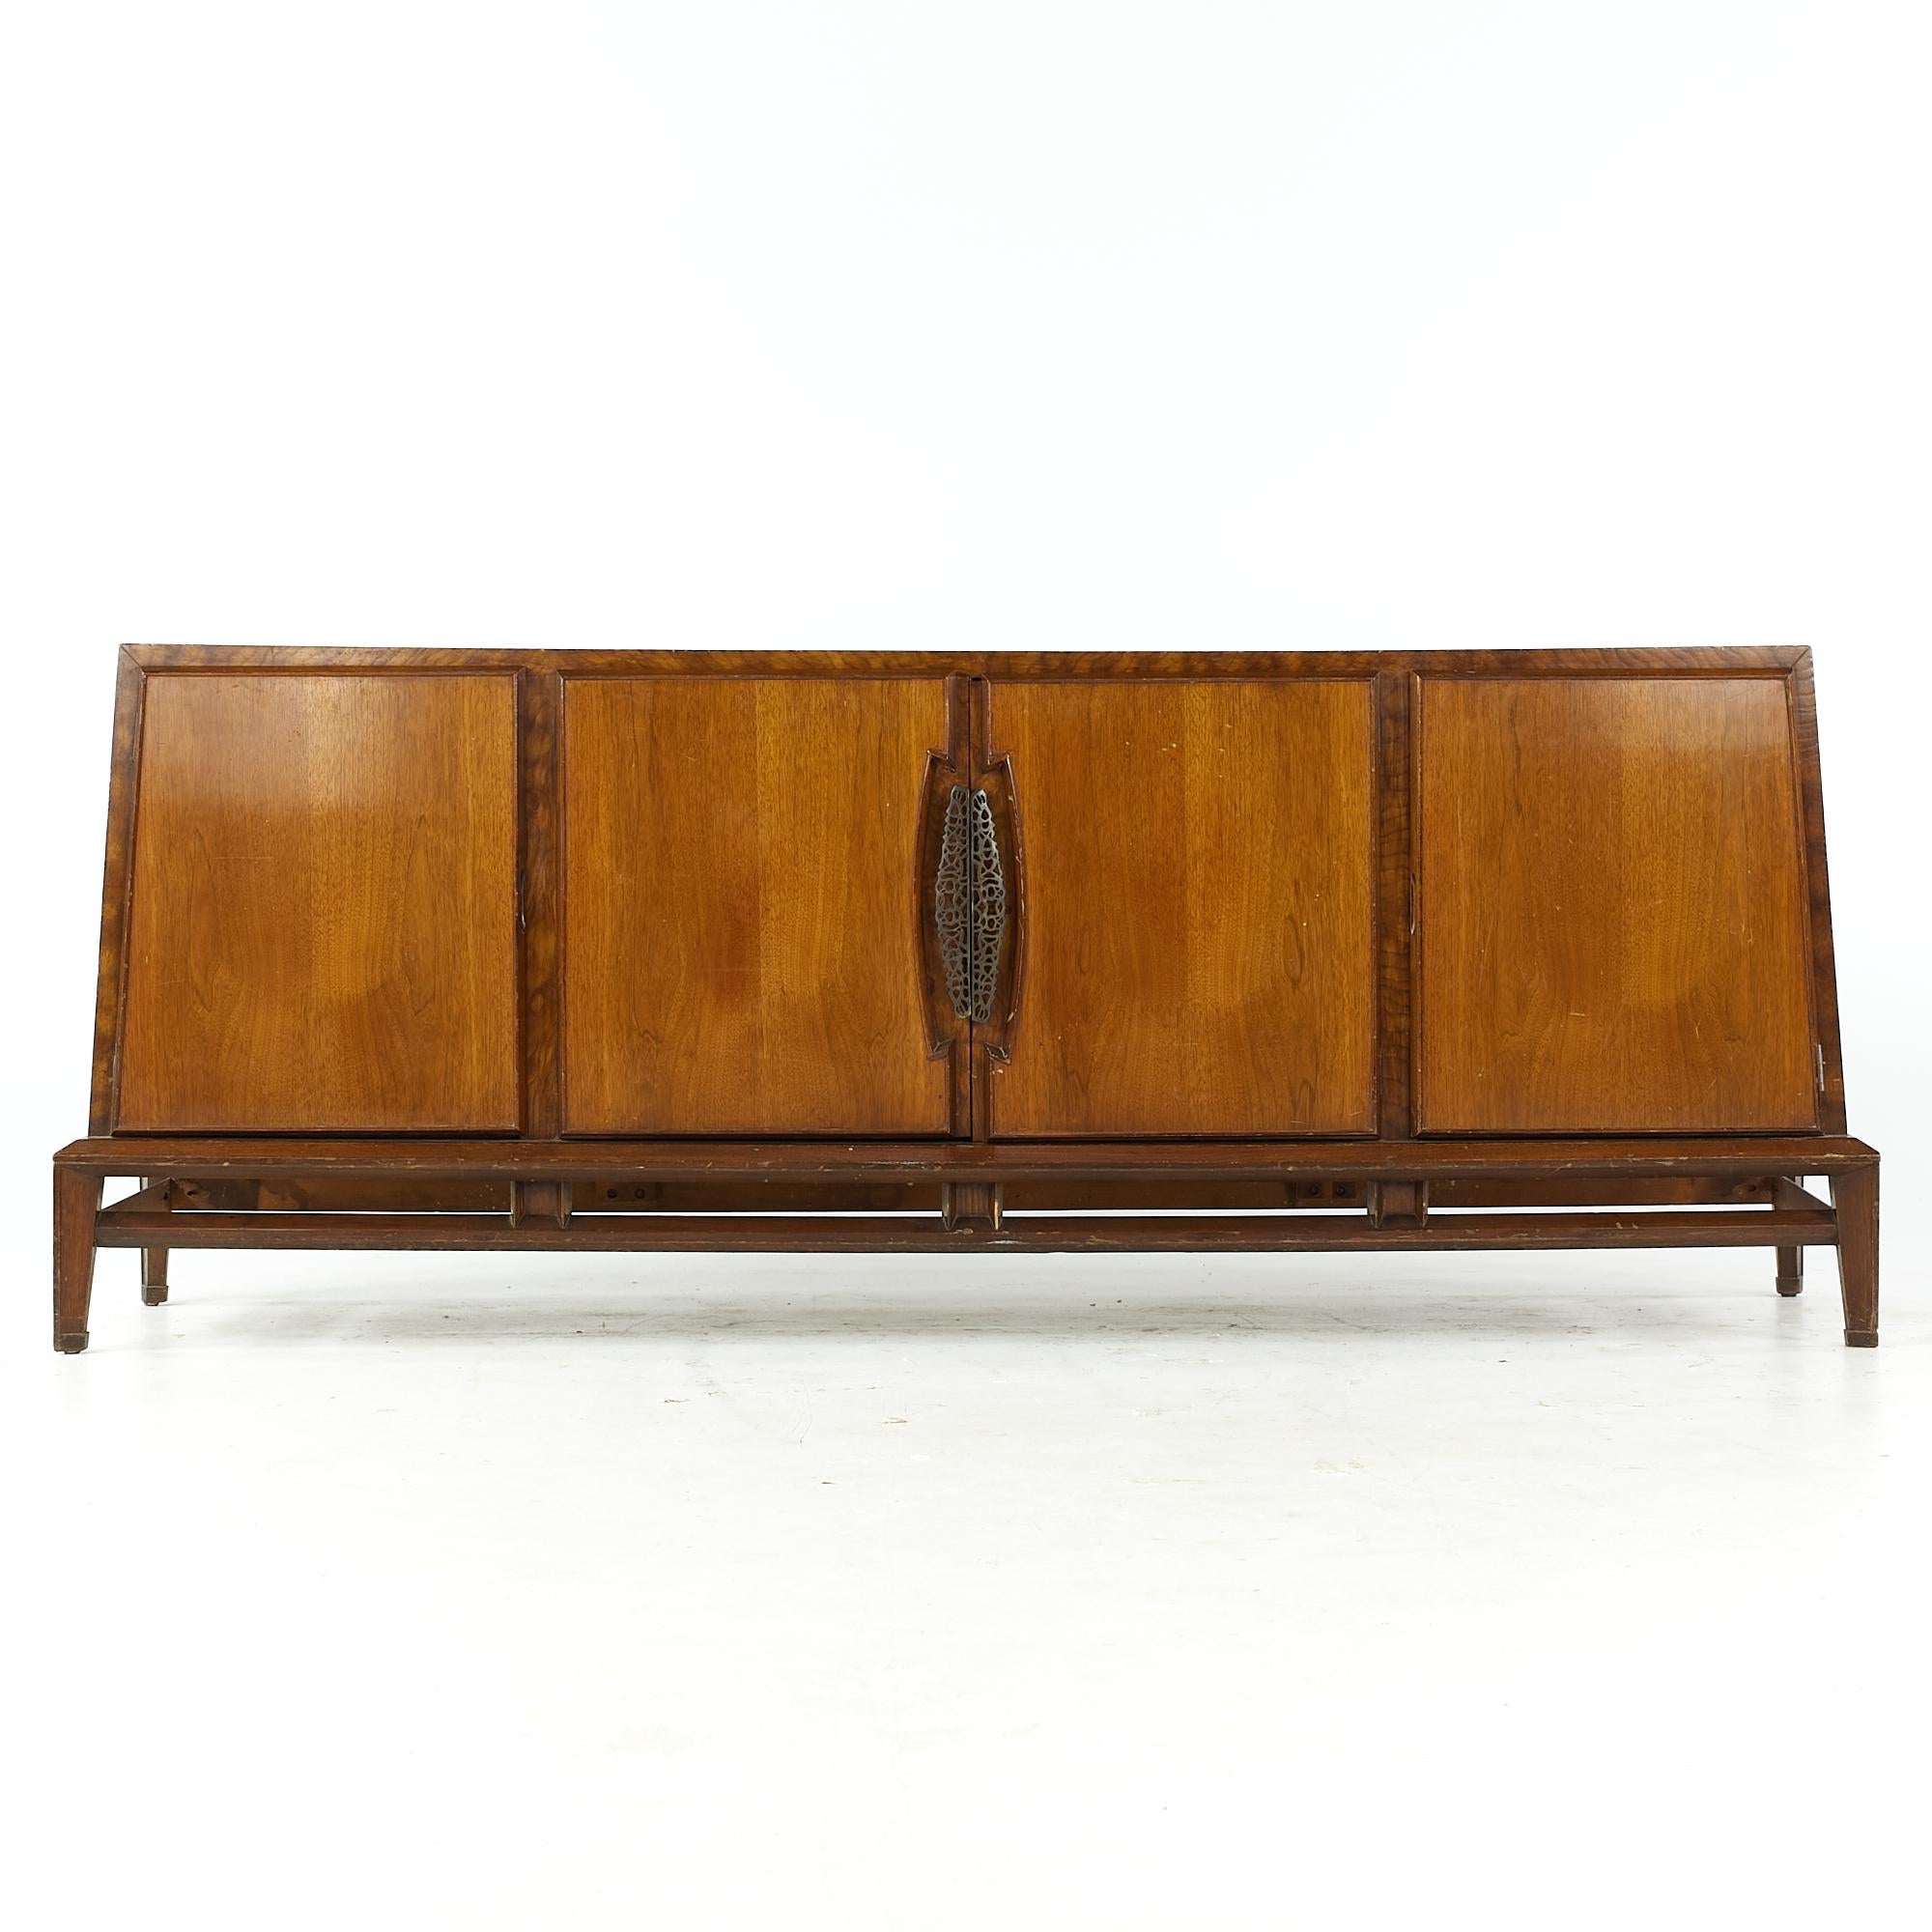 Helen Hobey Baker midcentury walnut and burlwood lowboy dresser

This lowboy measures: 81.5 wide x 21 deep x 31 inches high

All pieces of furniture can be had in what we call restored vintage condition. That means the piece is restored upon